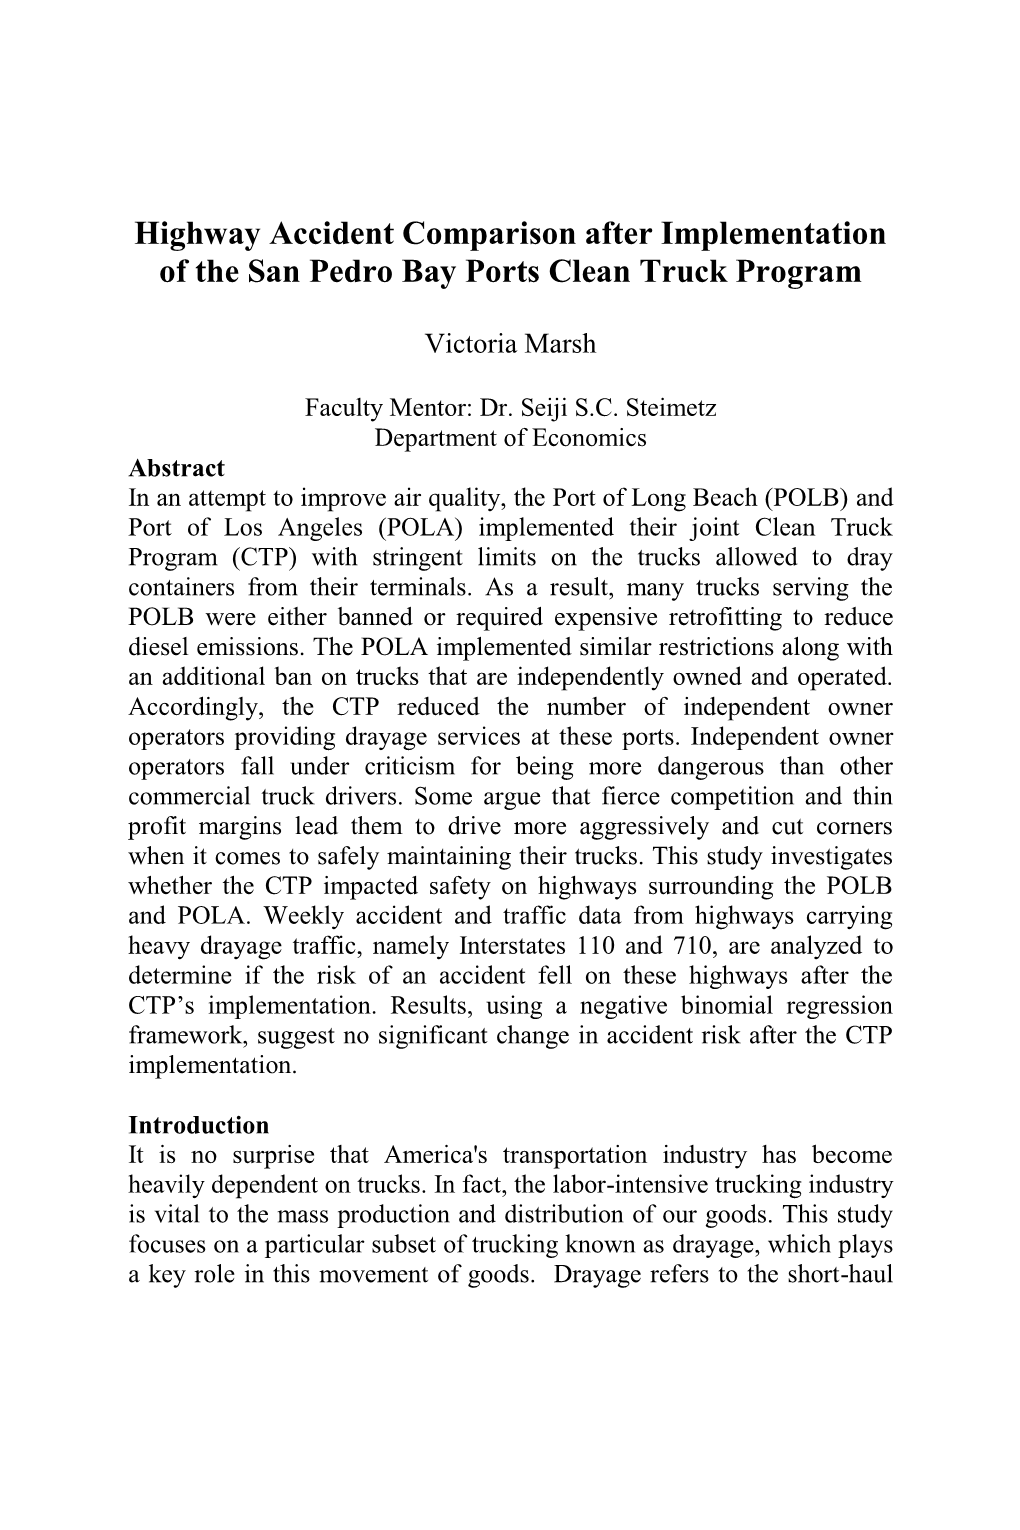 Highway Accident Comparison After Implementation of the San Pedro Bay Ports Clean Truck Program